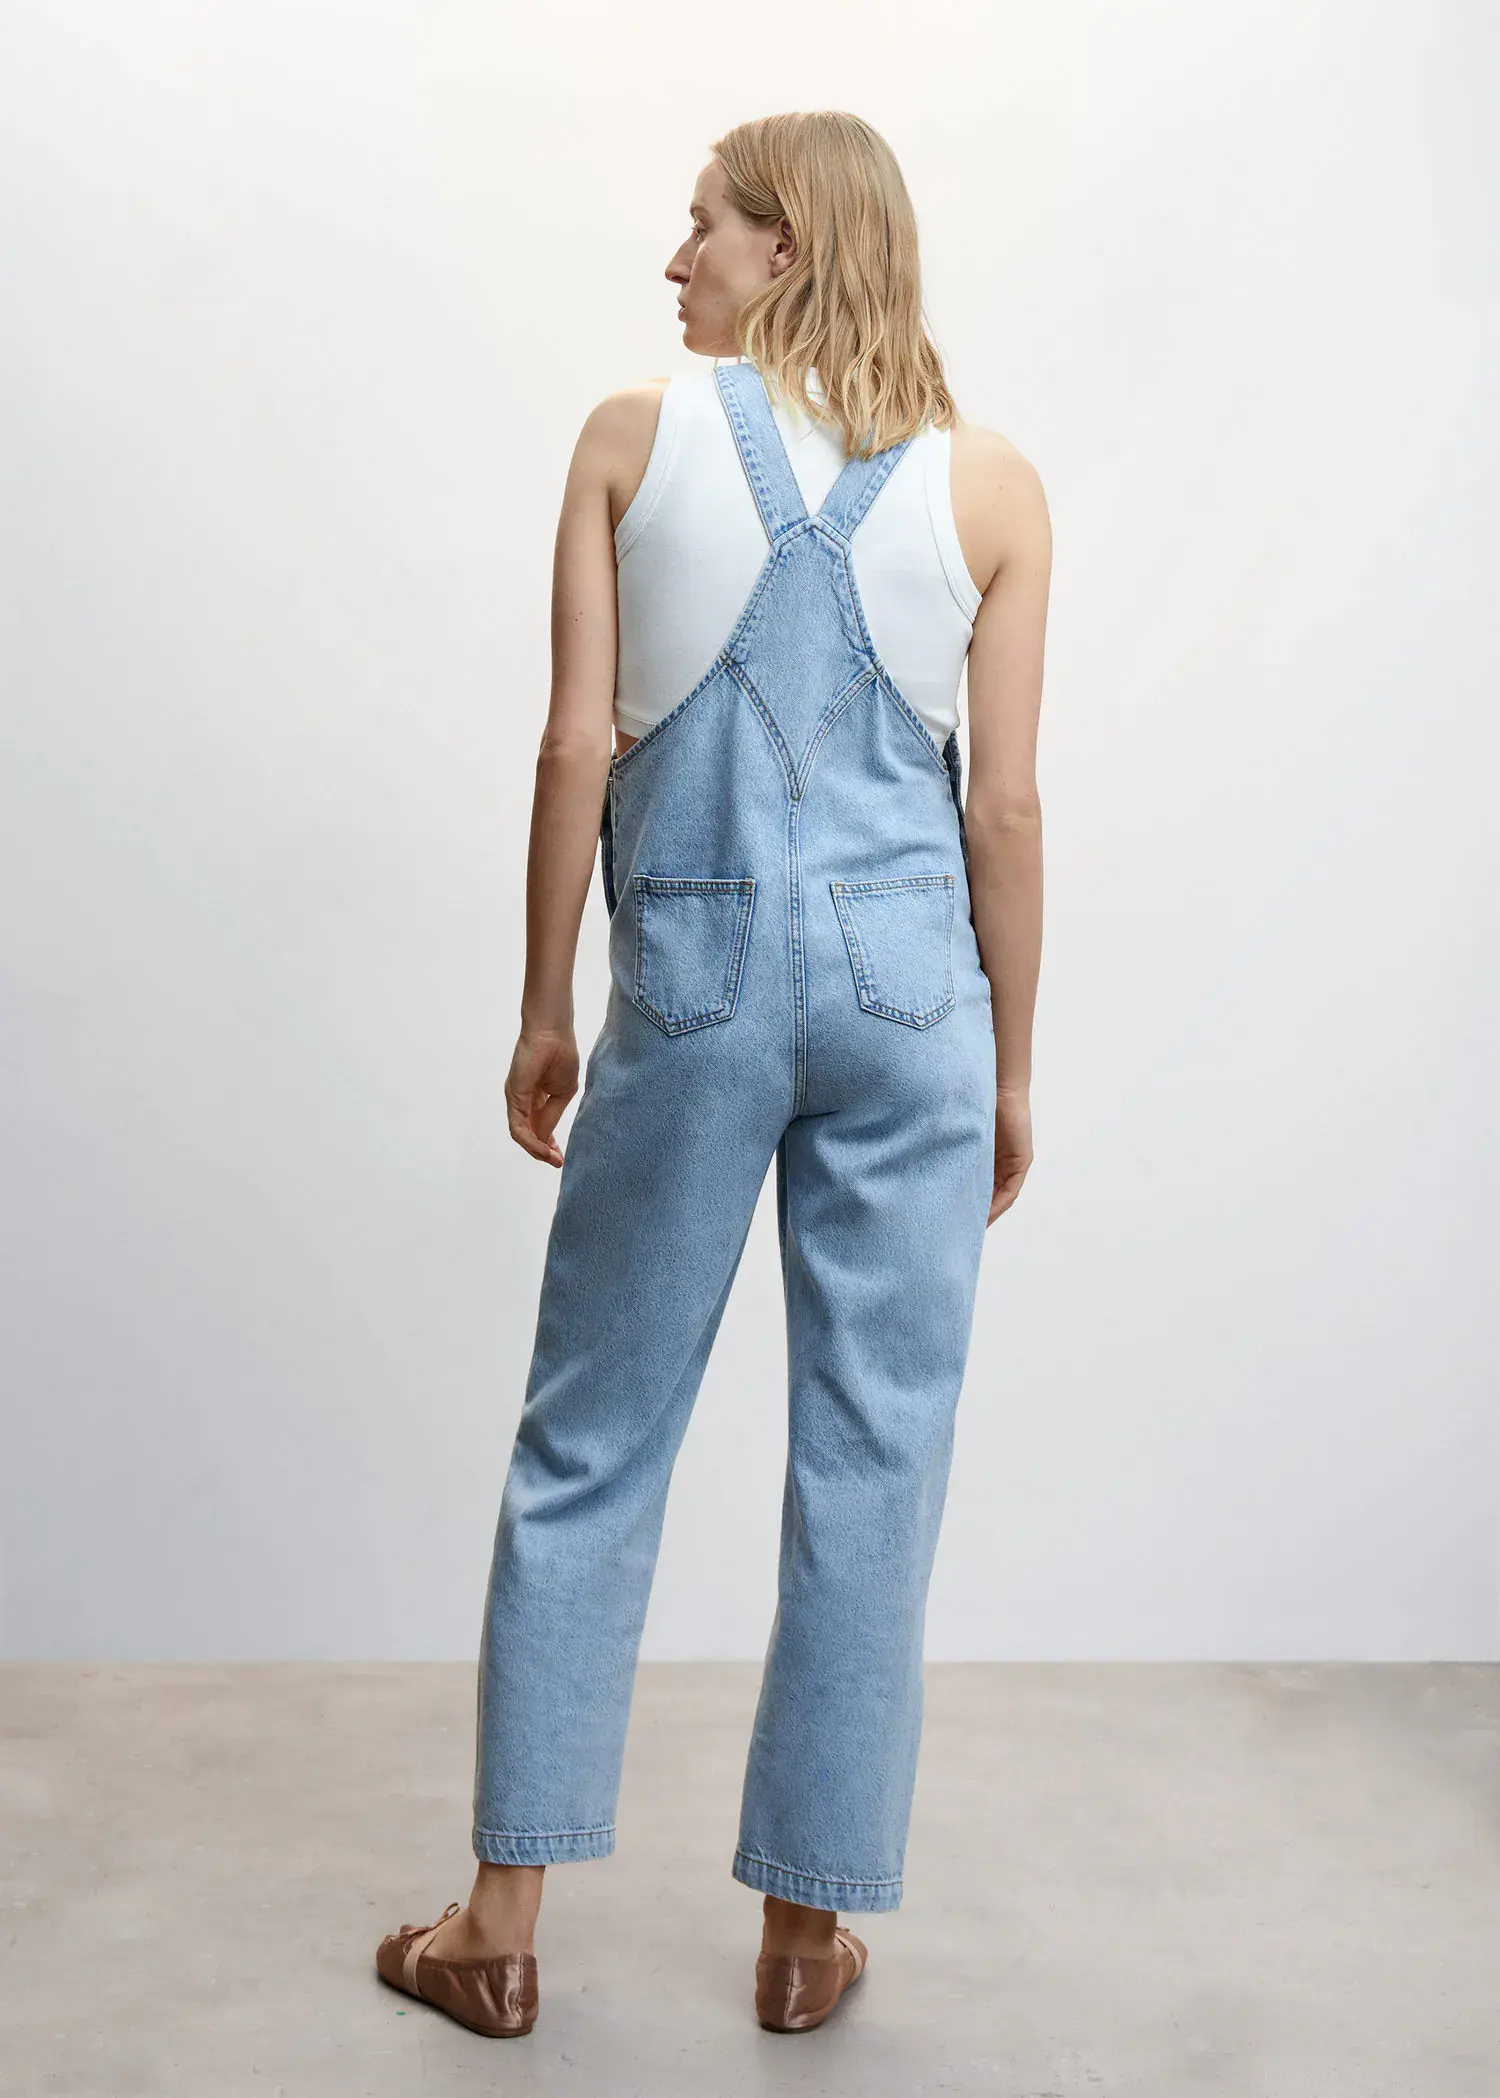 Mango Maternity denim dungarees. a woman wearing a blue overalls standing in front of a wall. 